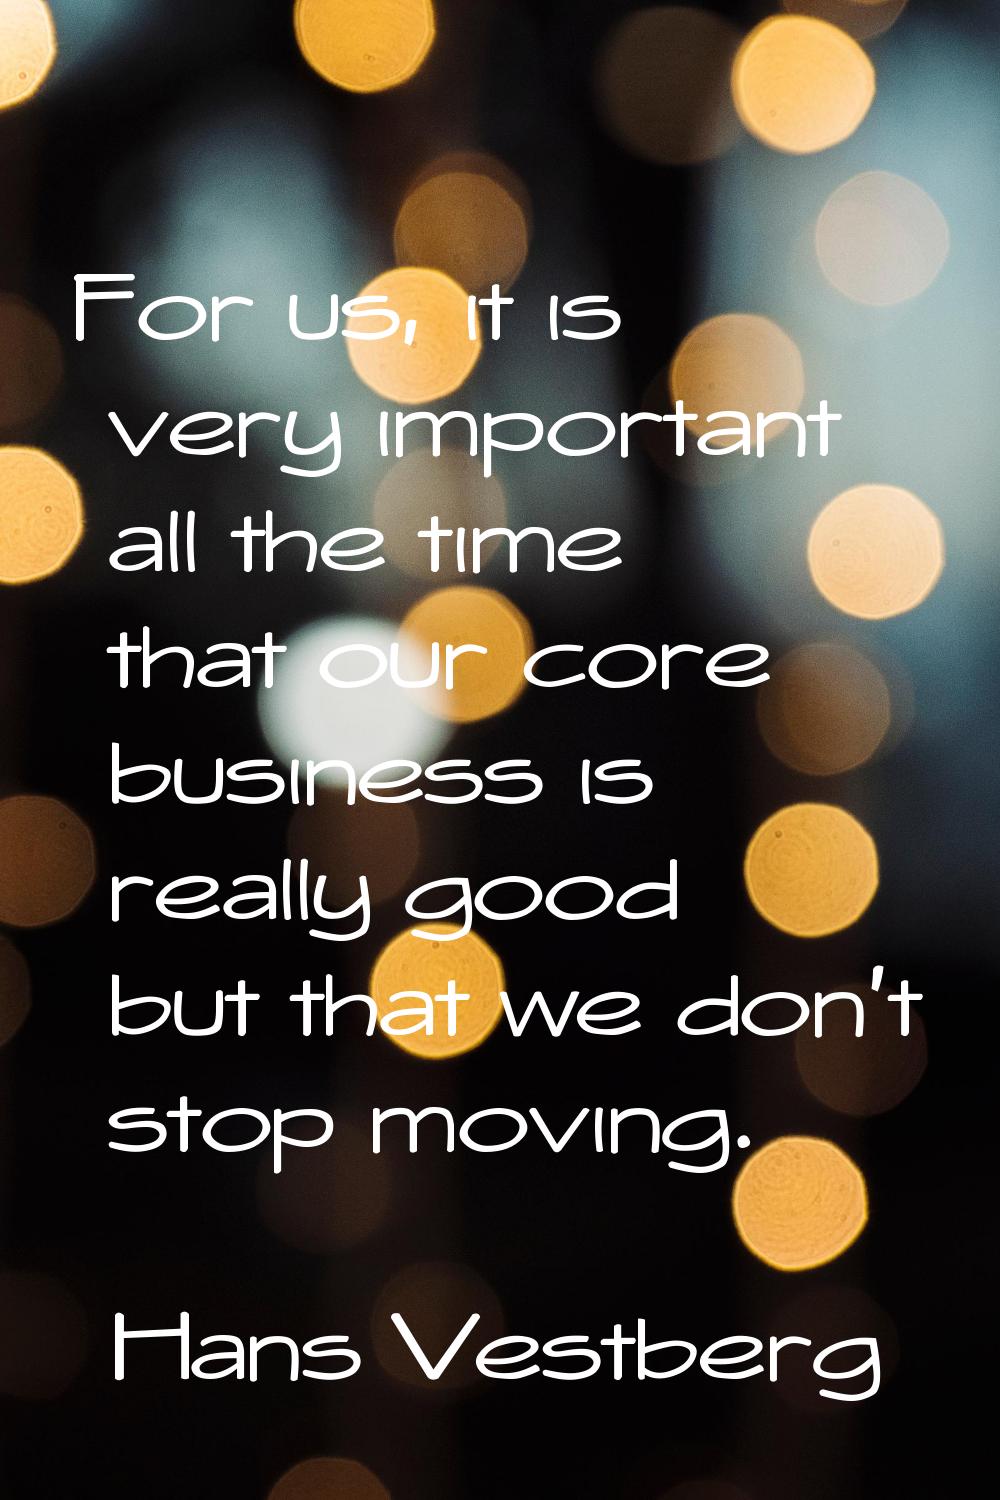 For us, it is very important all the time that our core business is really good but that we don't s